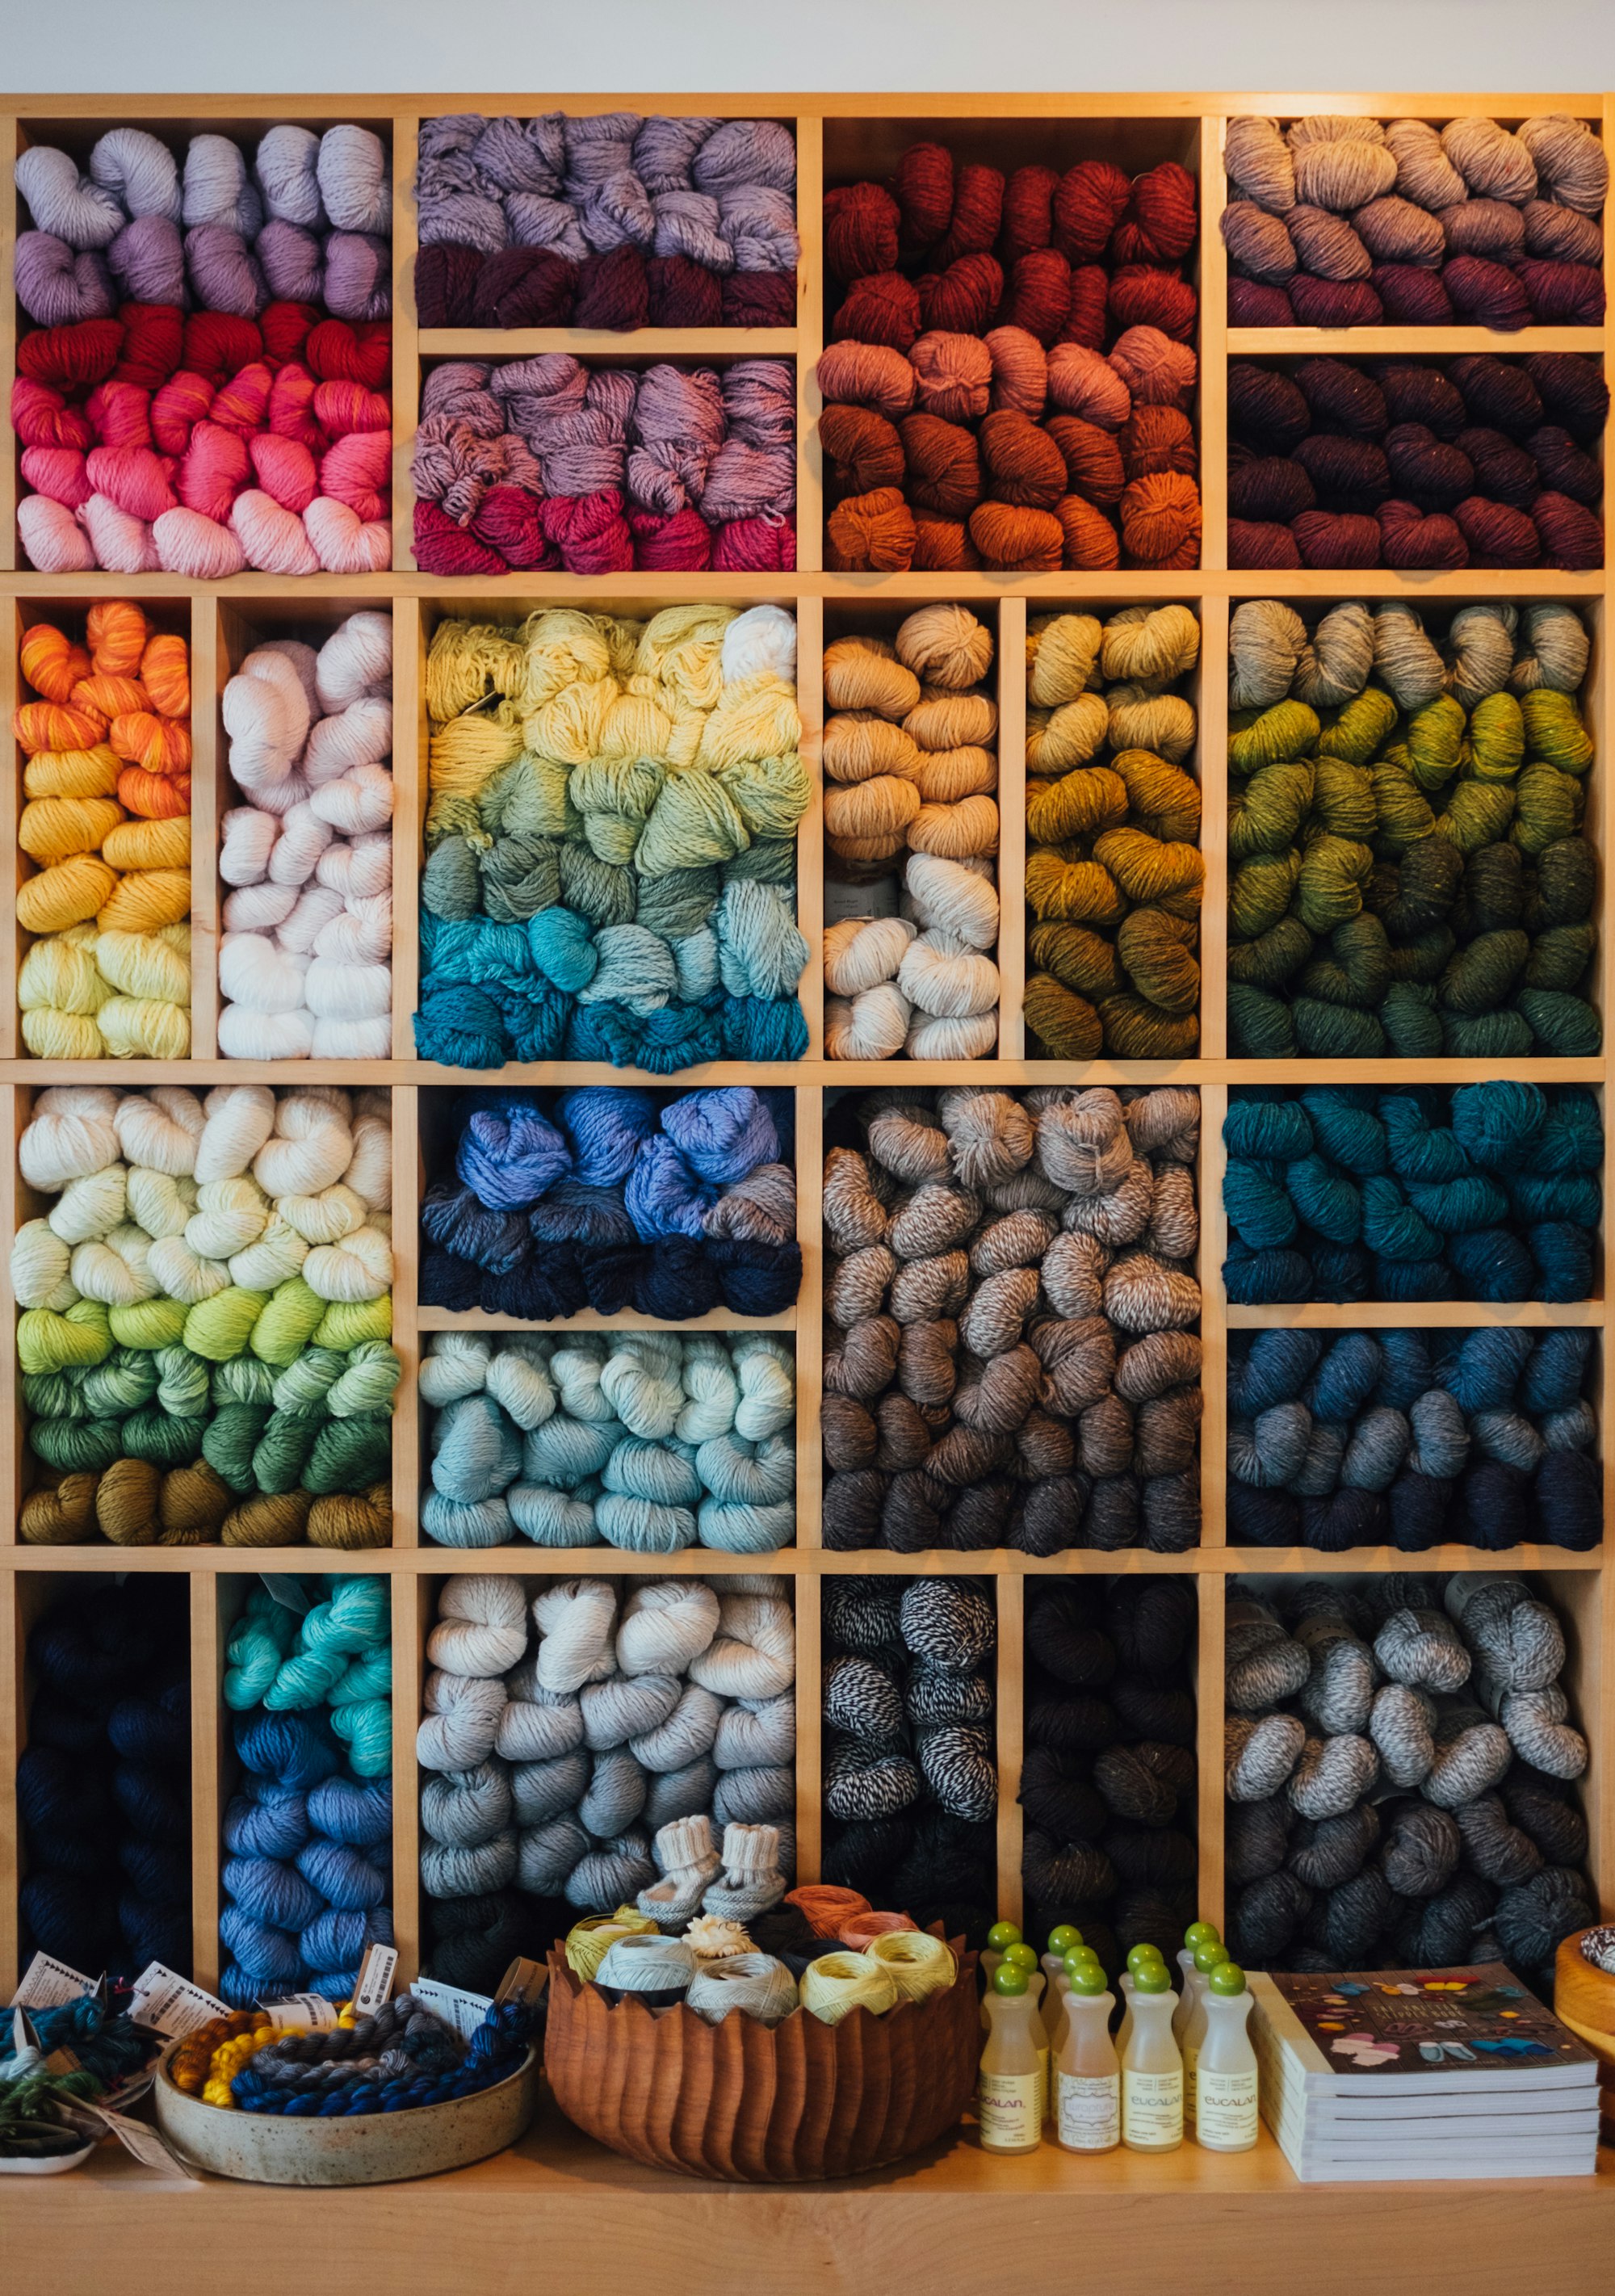 A bunch of different colors of yarn, sorted by color, sit bundled in cubbies.